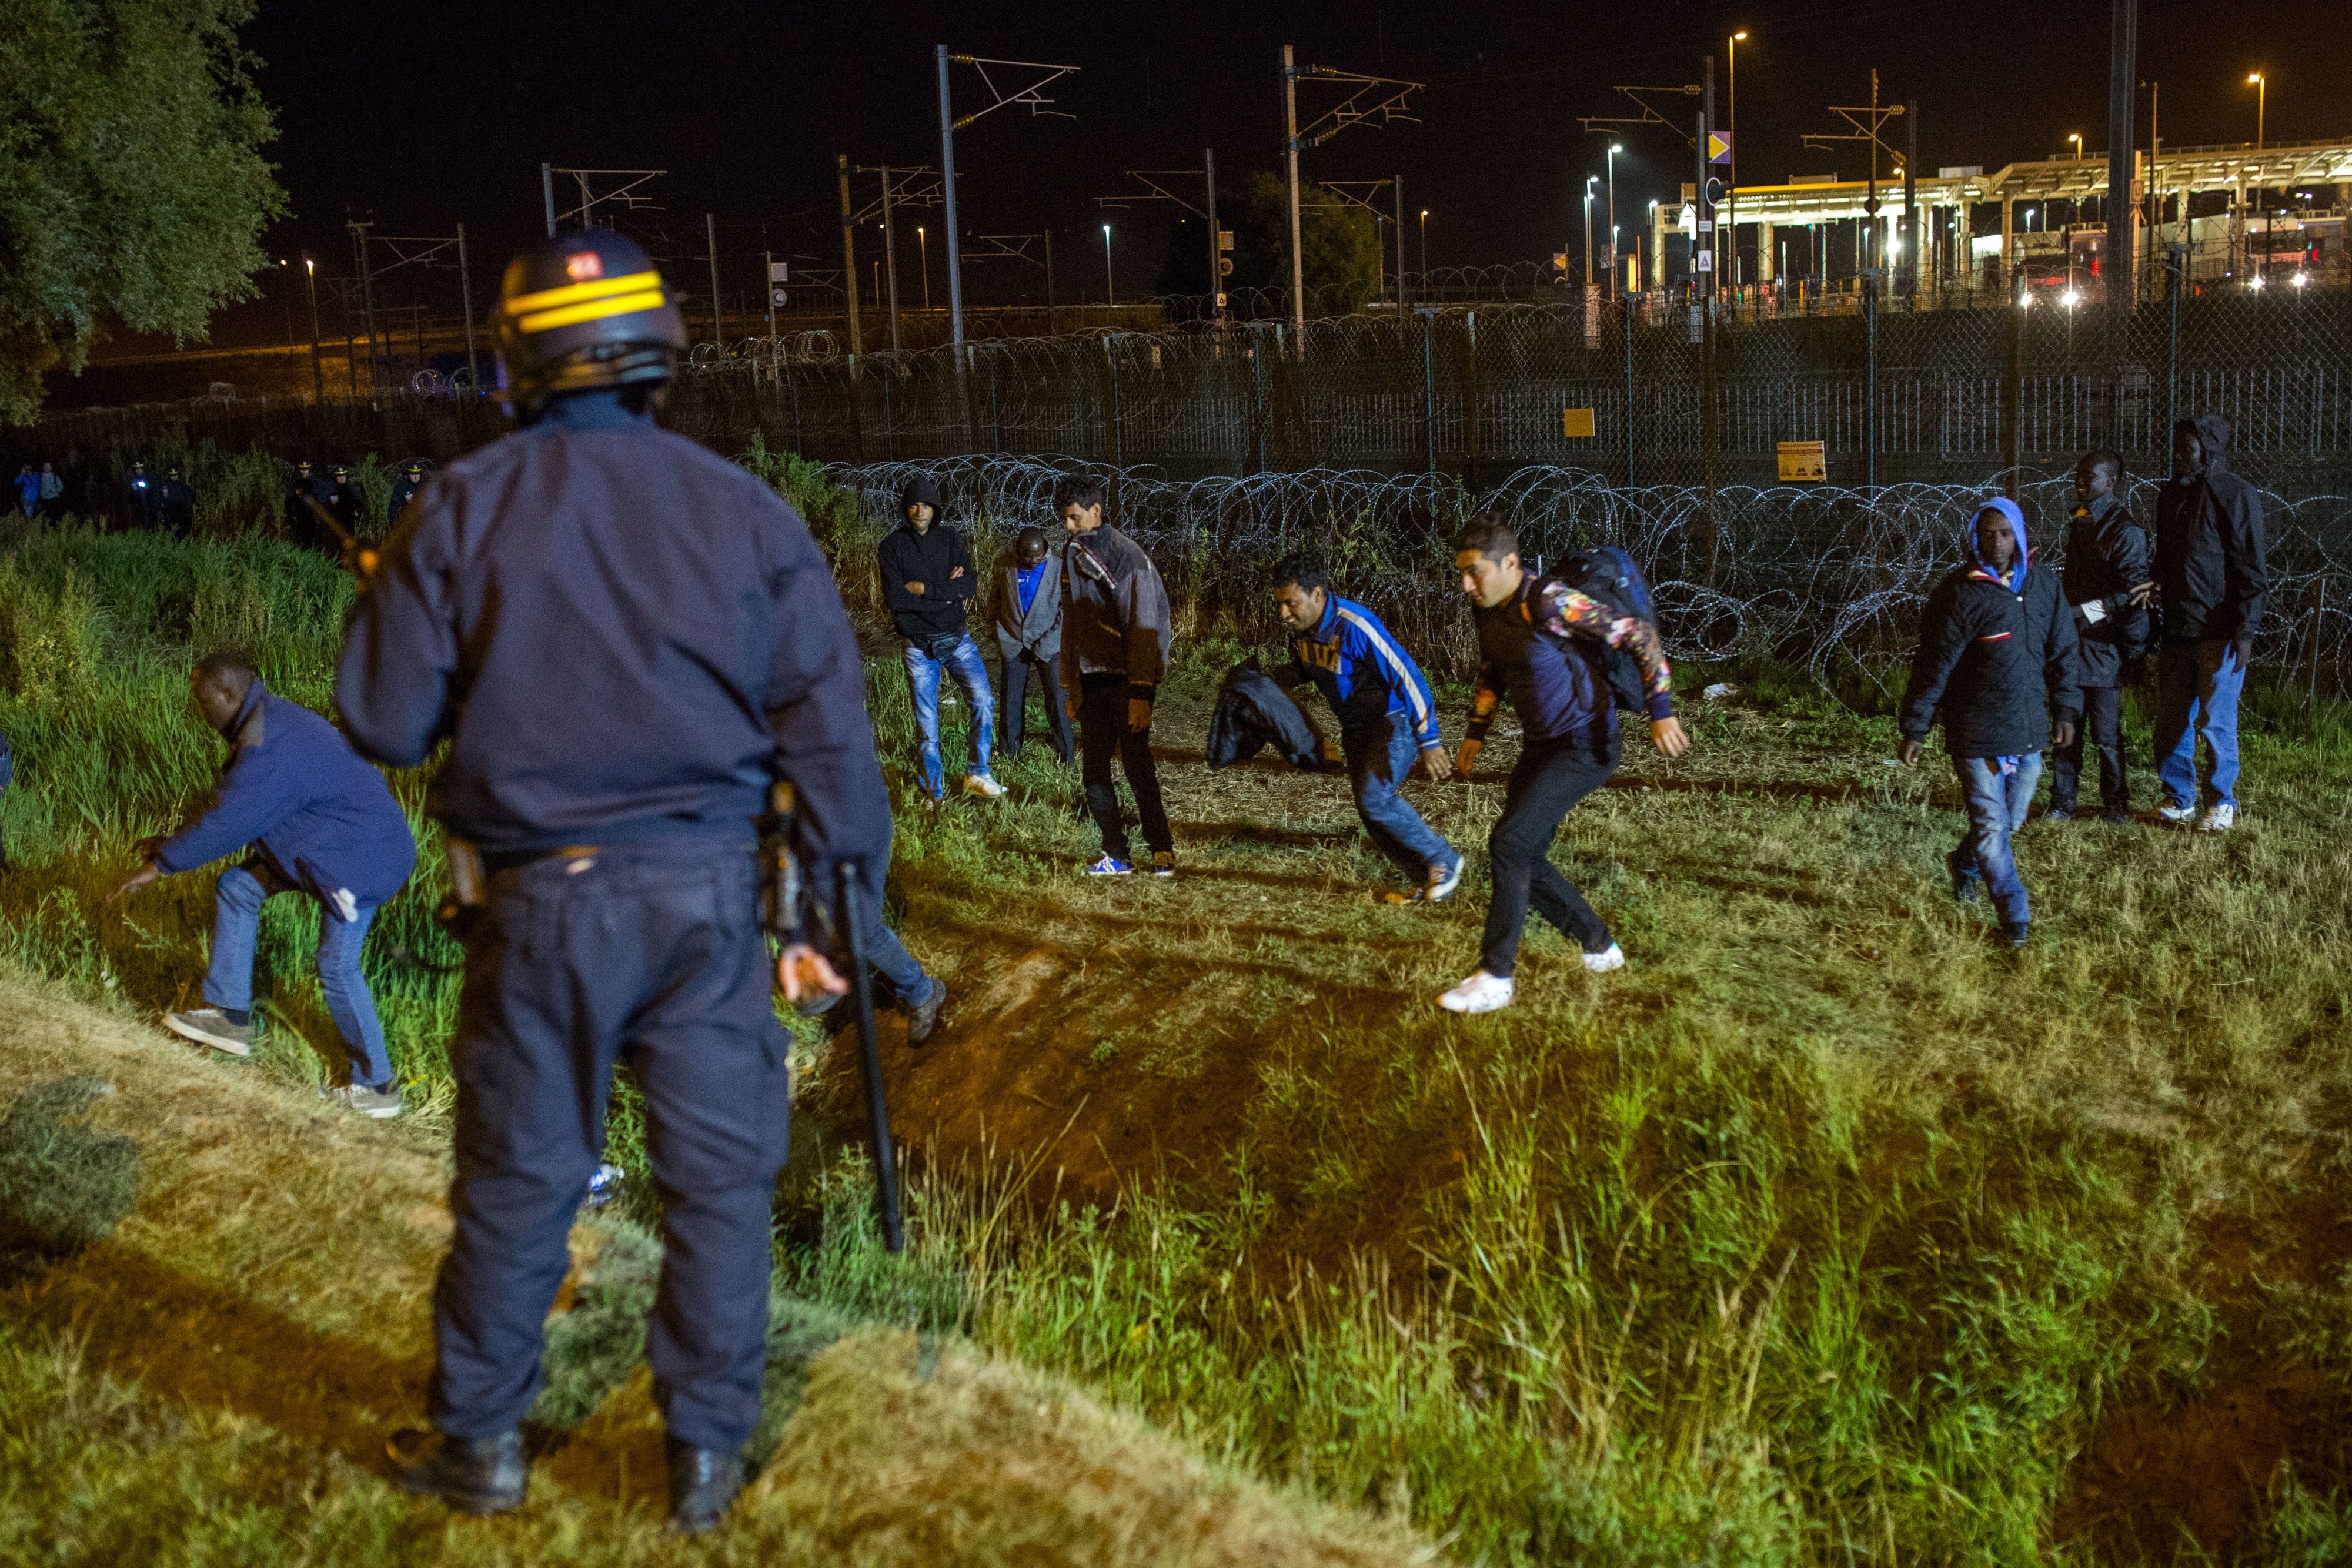 A policeman watches men move away from a security fence beside train tracks (Rob Stothard/Getty Images)